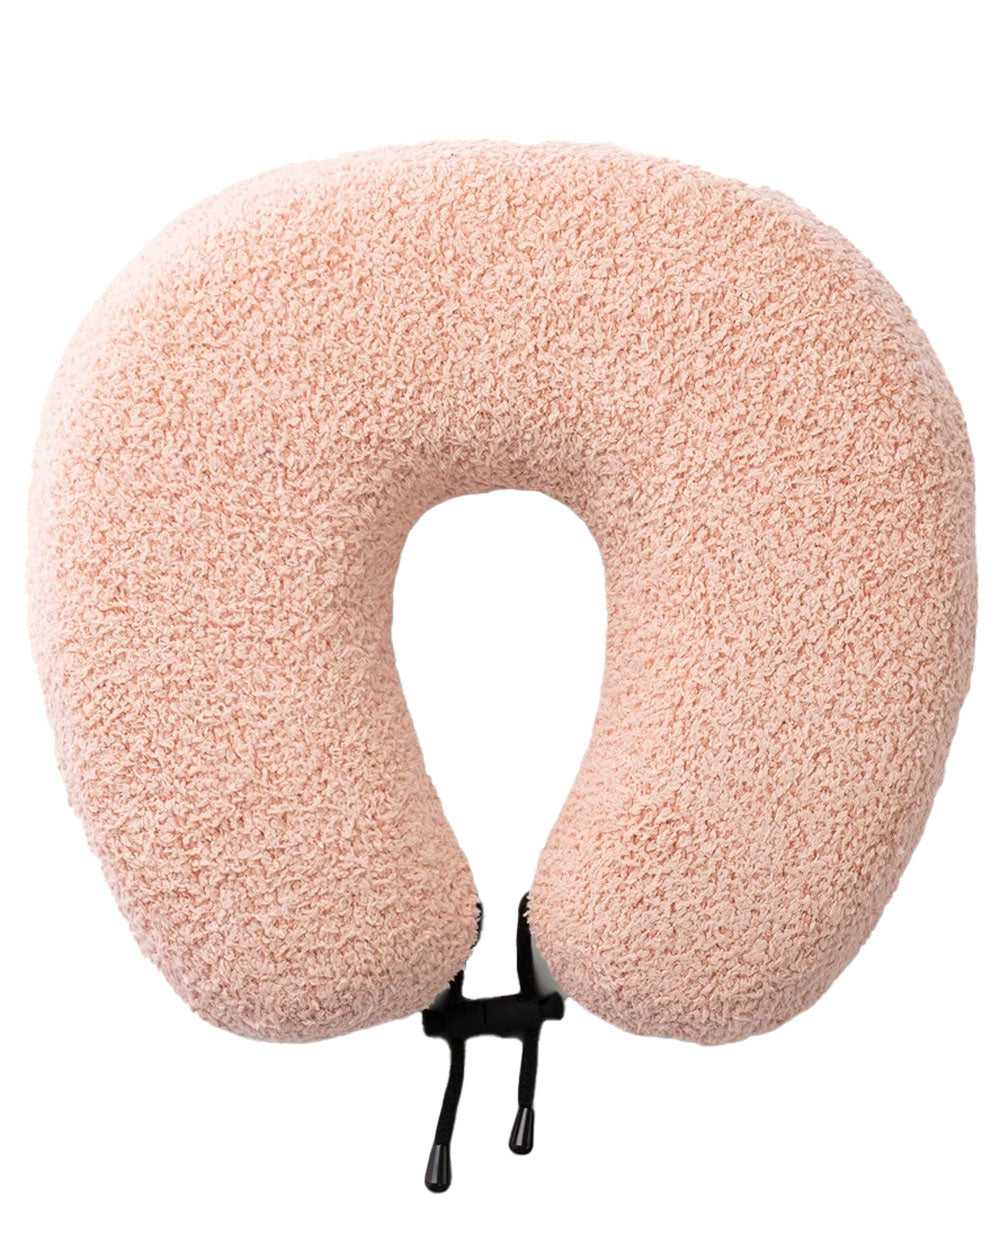 Misty Rose Cozy Chic Travel Neck Pillow